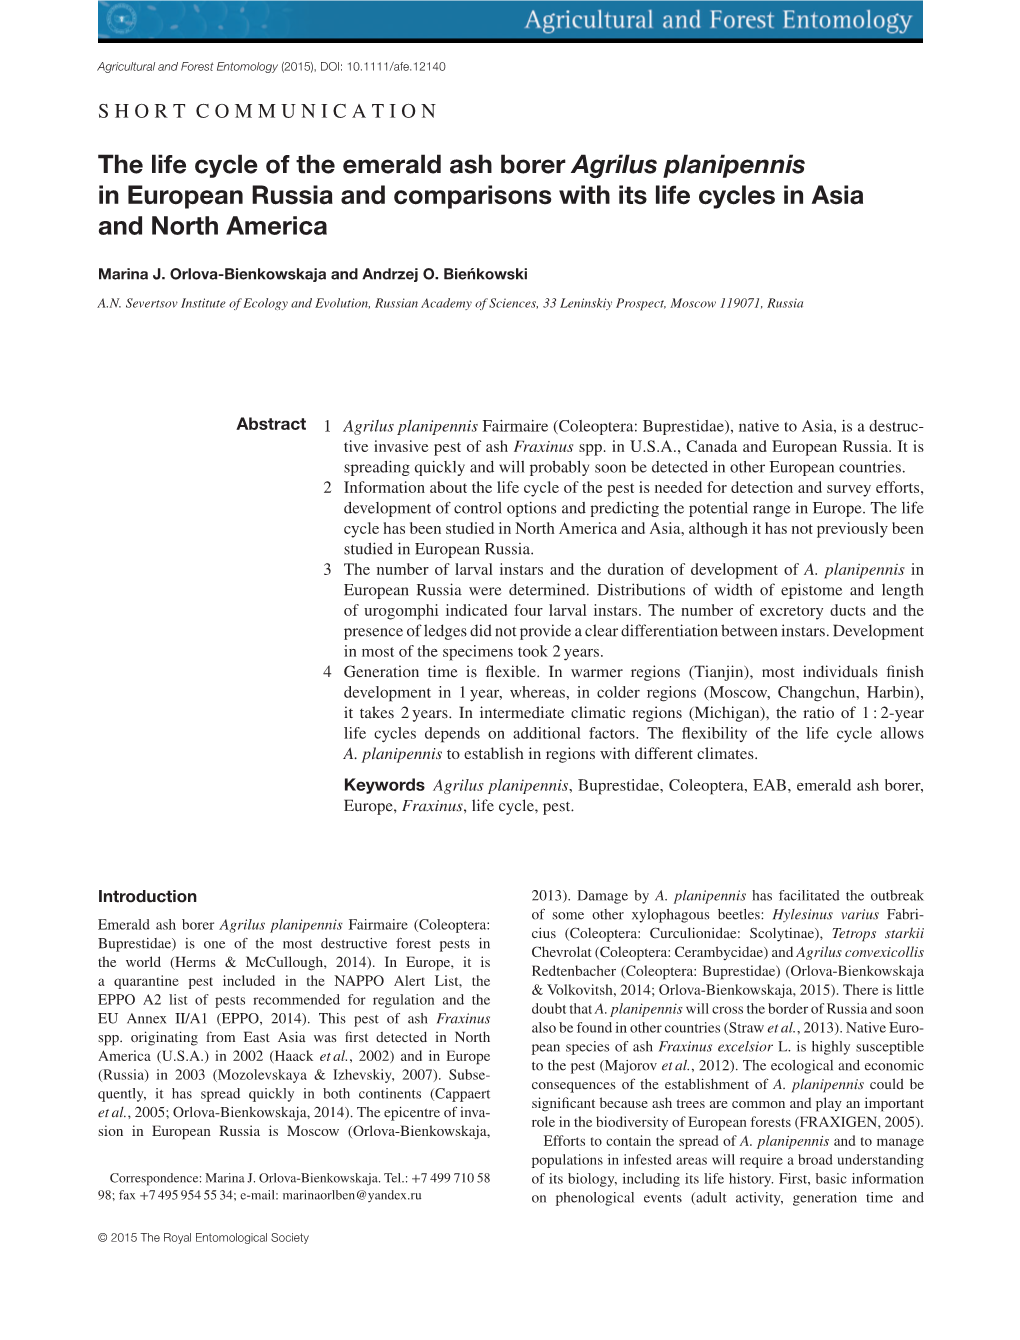 The Life Cycle of the Emerald Ash Borer Agrilus Planipennis in European Russia and Comparisons with Its Life Cycles in Asia and North America